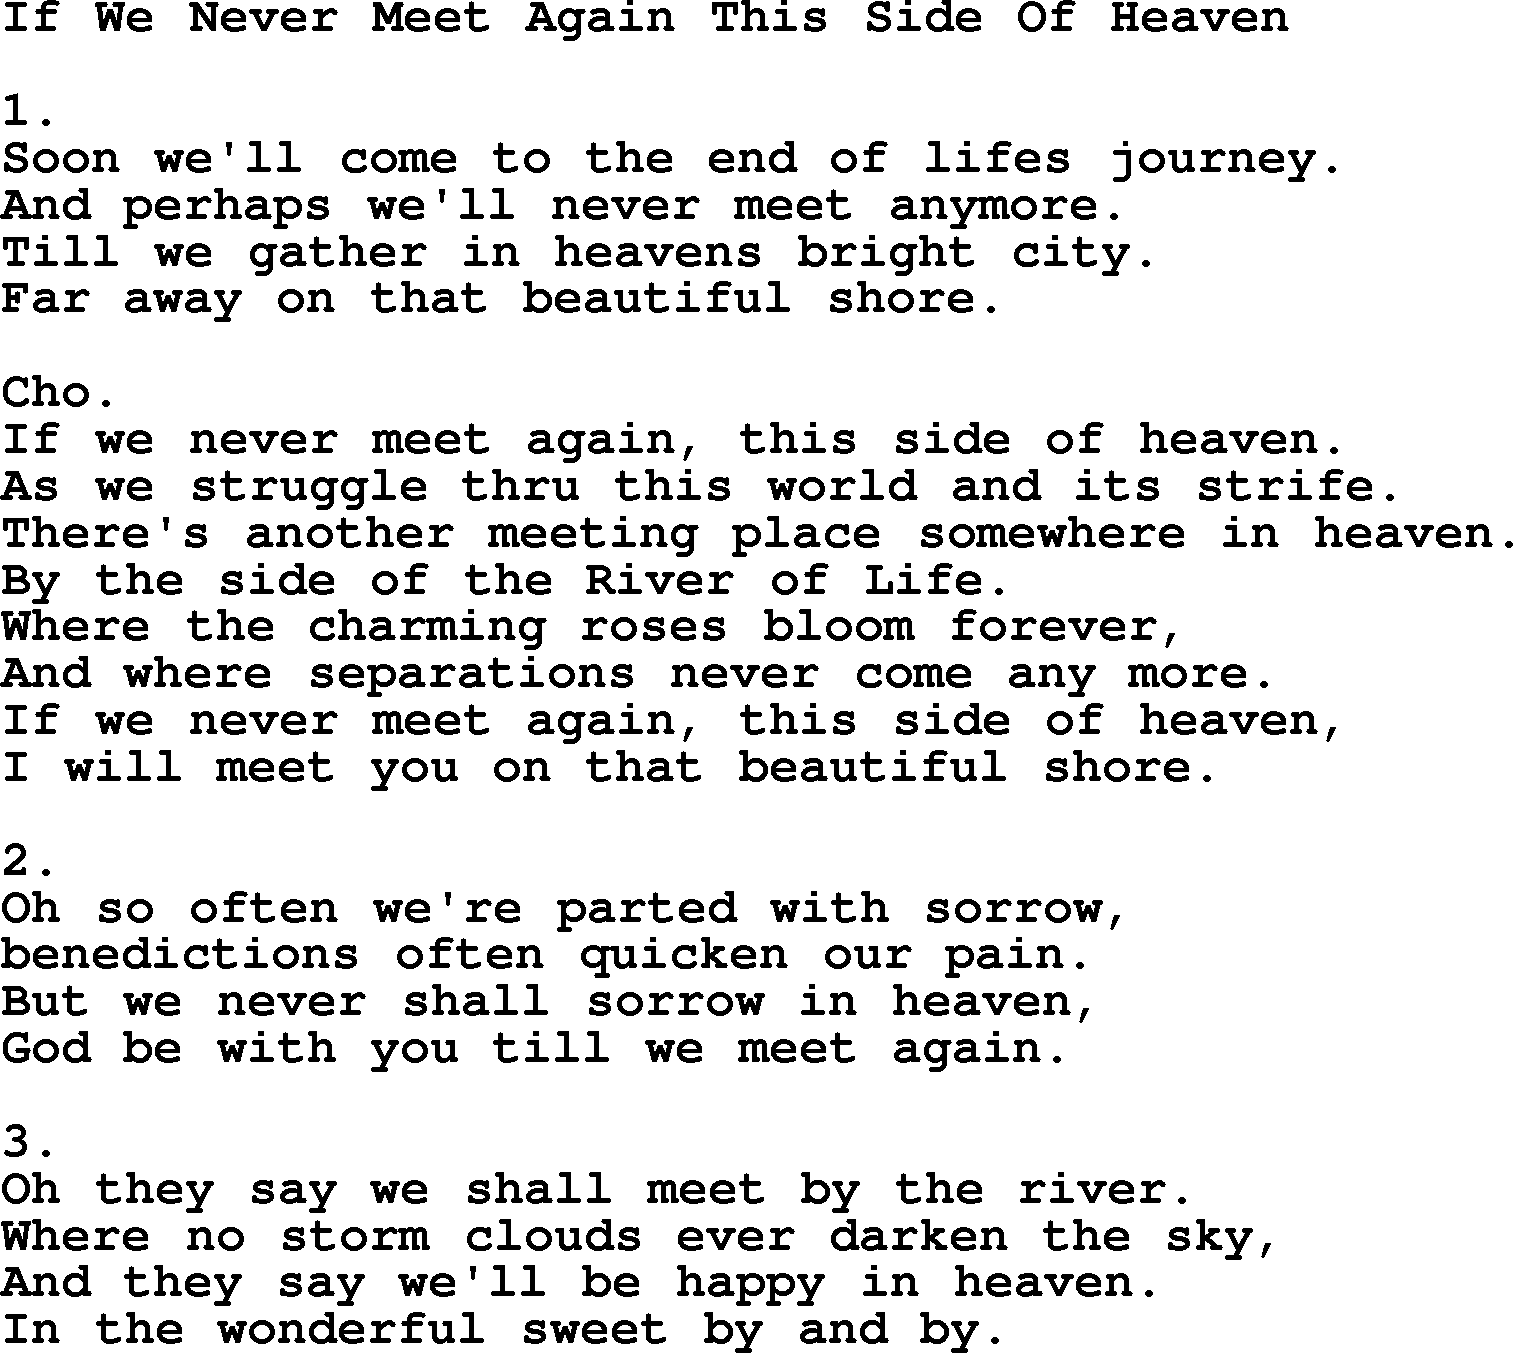 Apostolic & Pentecostal Hymns and Songs, Hymn: If We Never Meet Again This Side Of Heaven lyrics and PDF